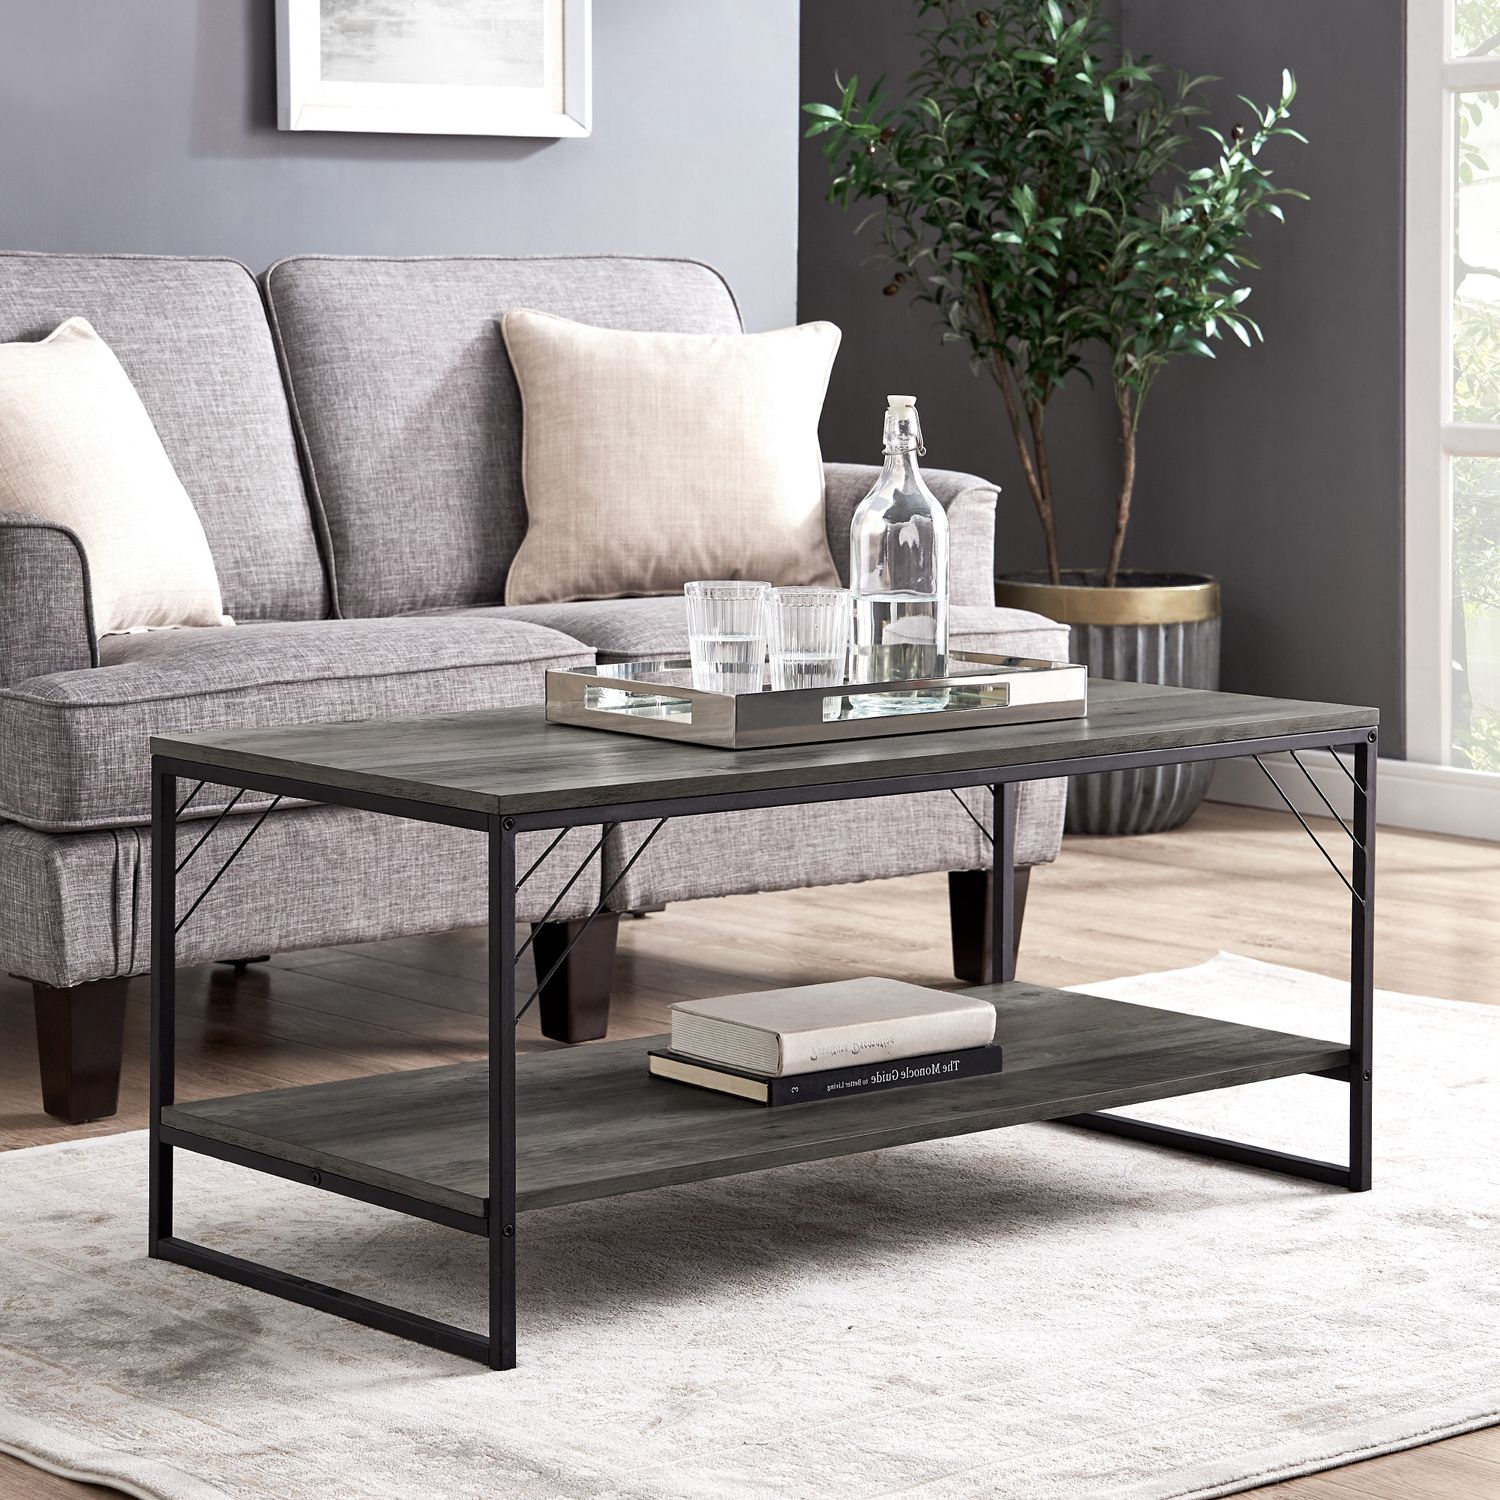 Industrial Metal Accent Gray Wash Coffee Table – Pier1 Imports Intended For Favorite Metal Coffee Tables (View 5 of 10)